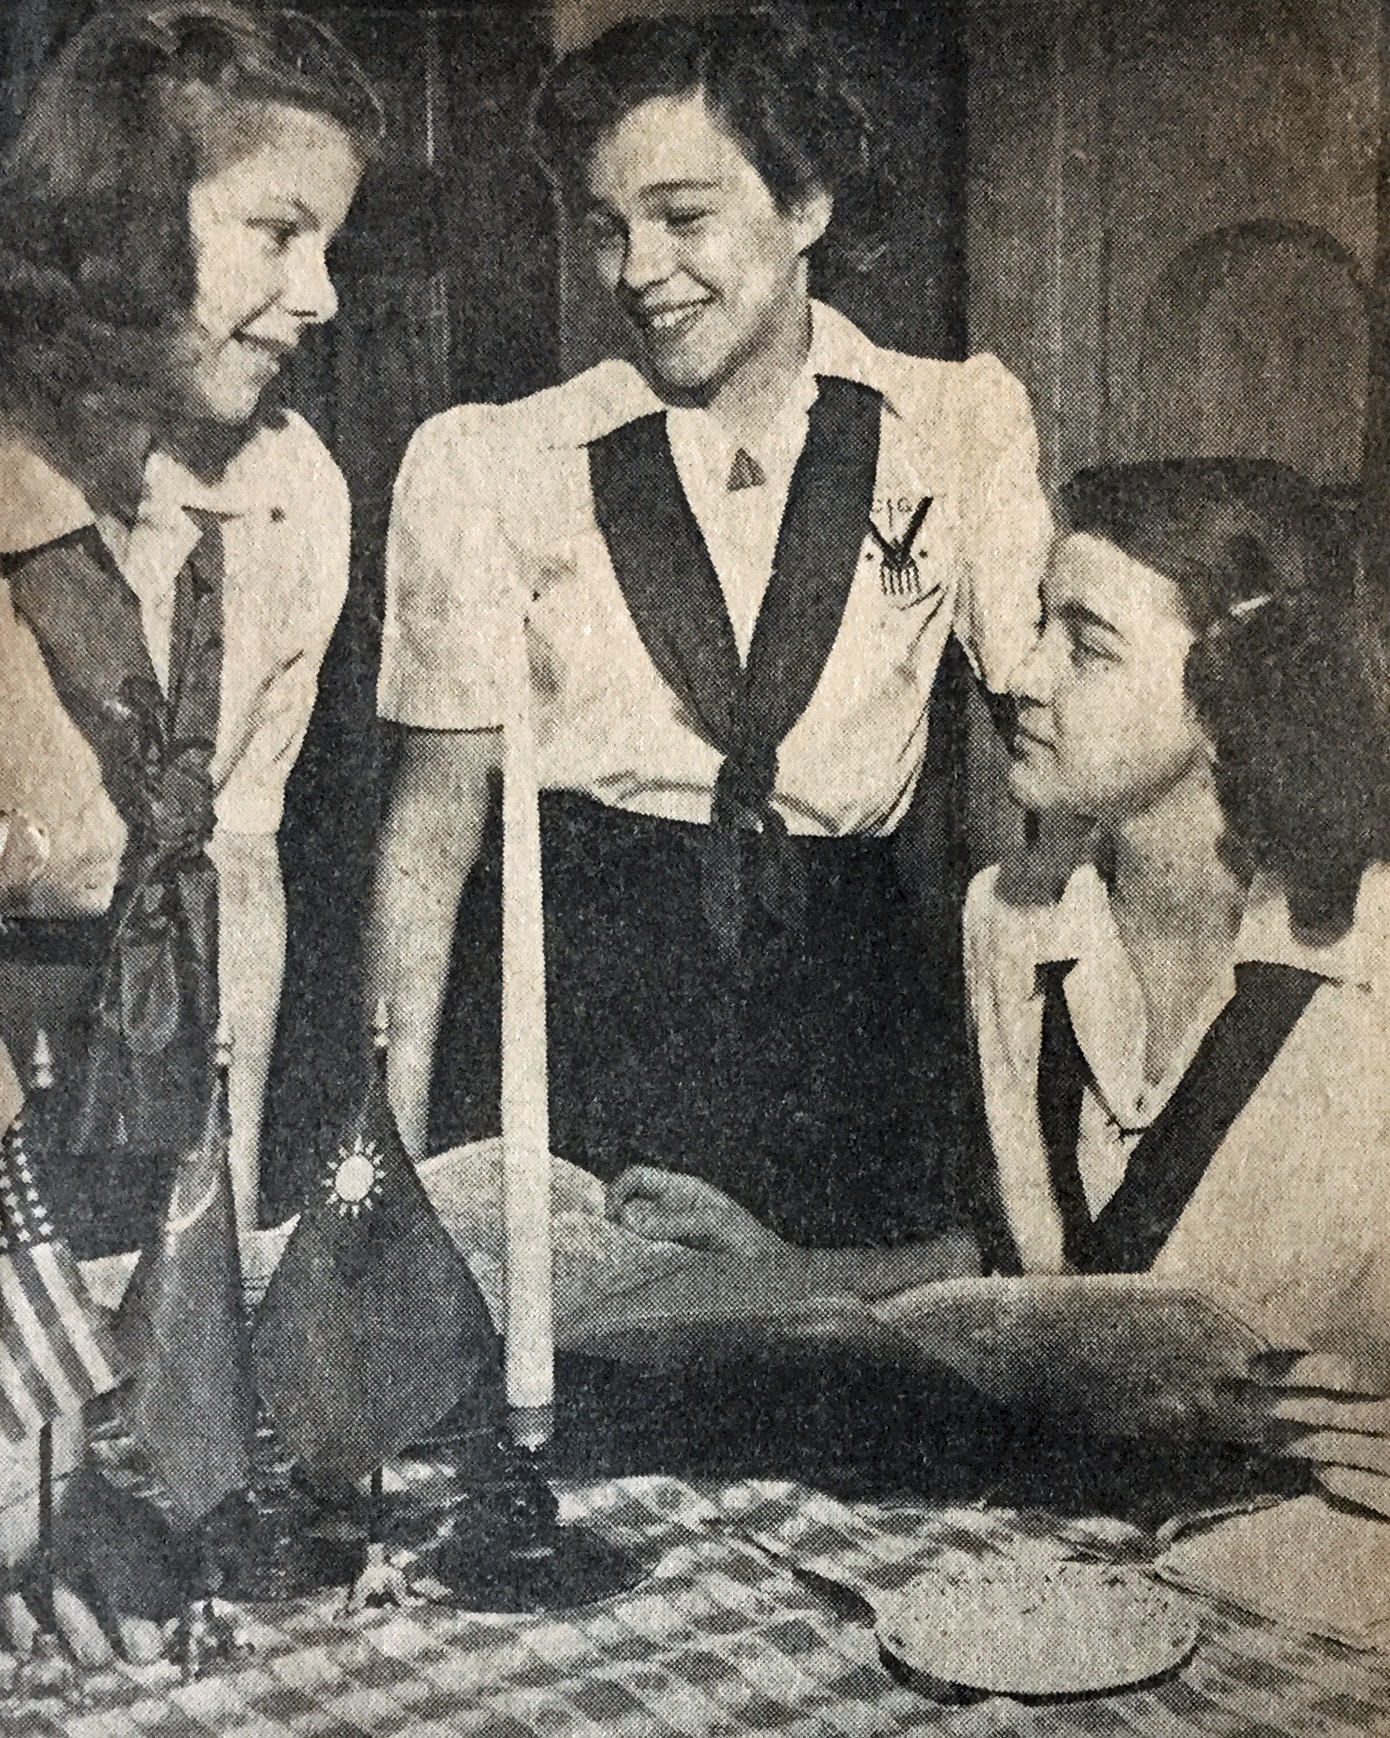 Barbara Hoehne, right, Campfire Girl, April 1945
Caption under photo from Minneapolis Daily Times:

Typical of the Campfire Girls’ observance all over the nation today marking the opening of the world security conference will be the Dutch dinner and candle ceremony held tonight by Monokasee group at the home of Corinne Brown, 5201 Clinton Av., center.helping her with arrangements are Pam Rogers, 5344 Clinton Am., left, and Barbara Hoehne, 5341 Third Av. S., right.  This is the fourth internation